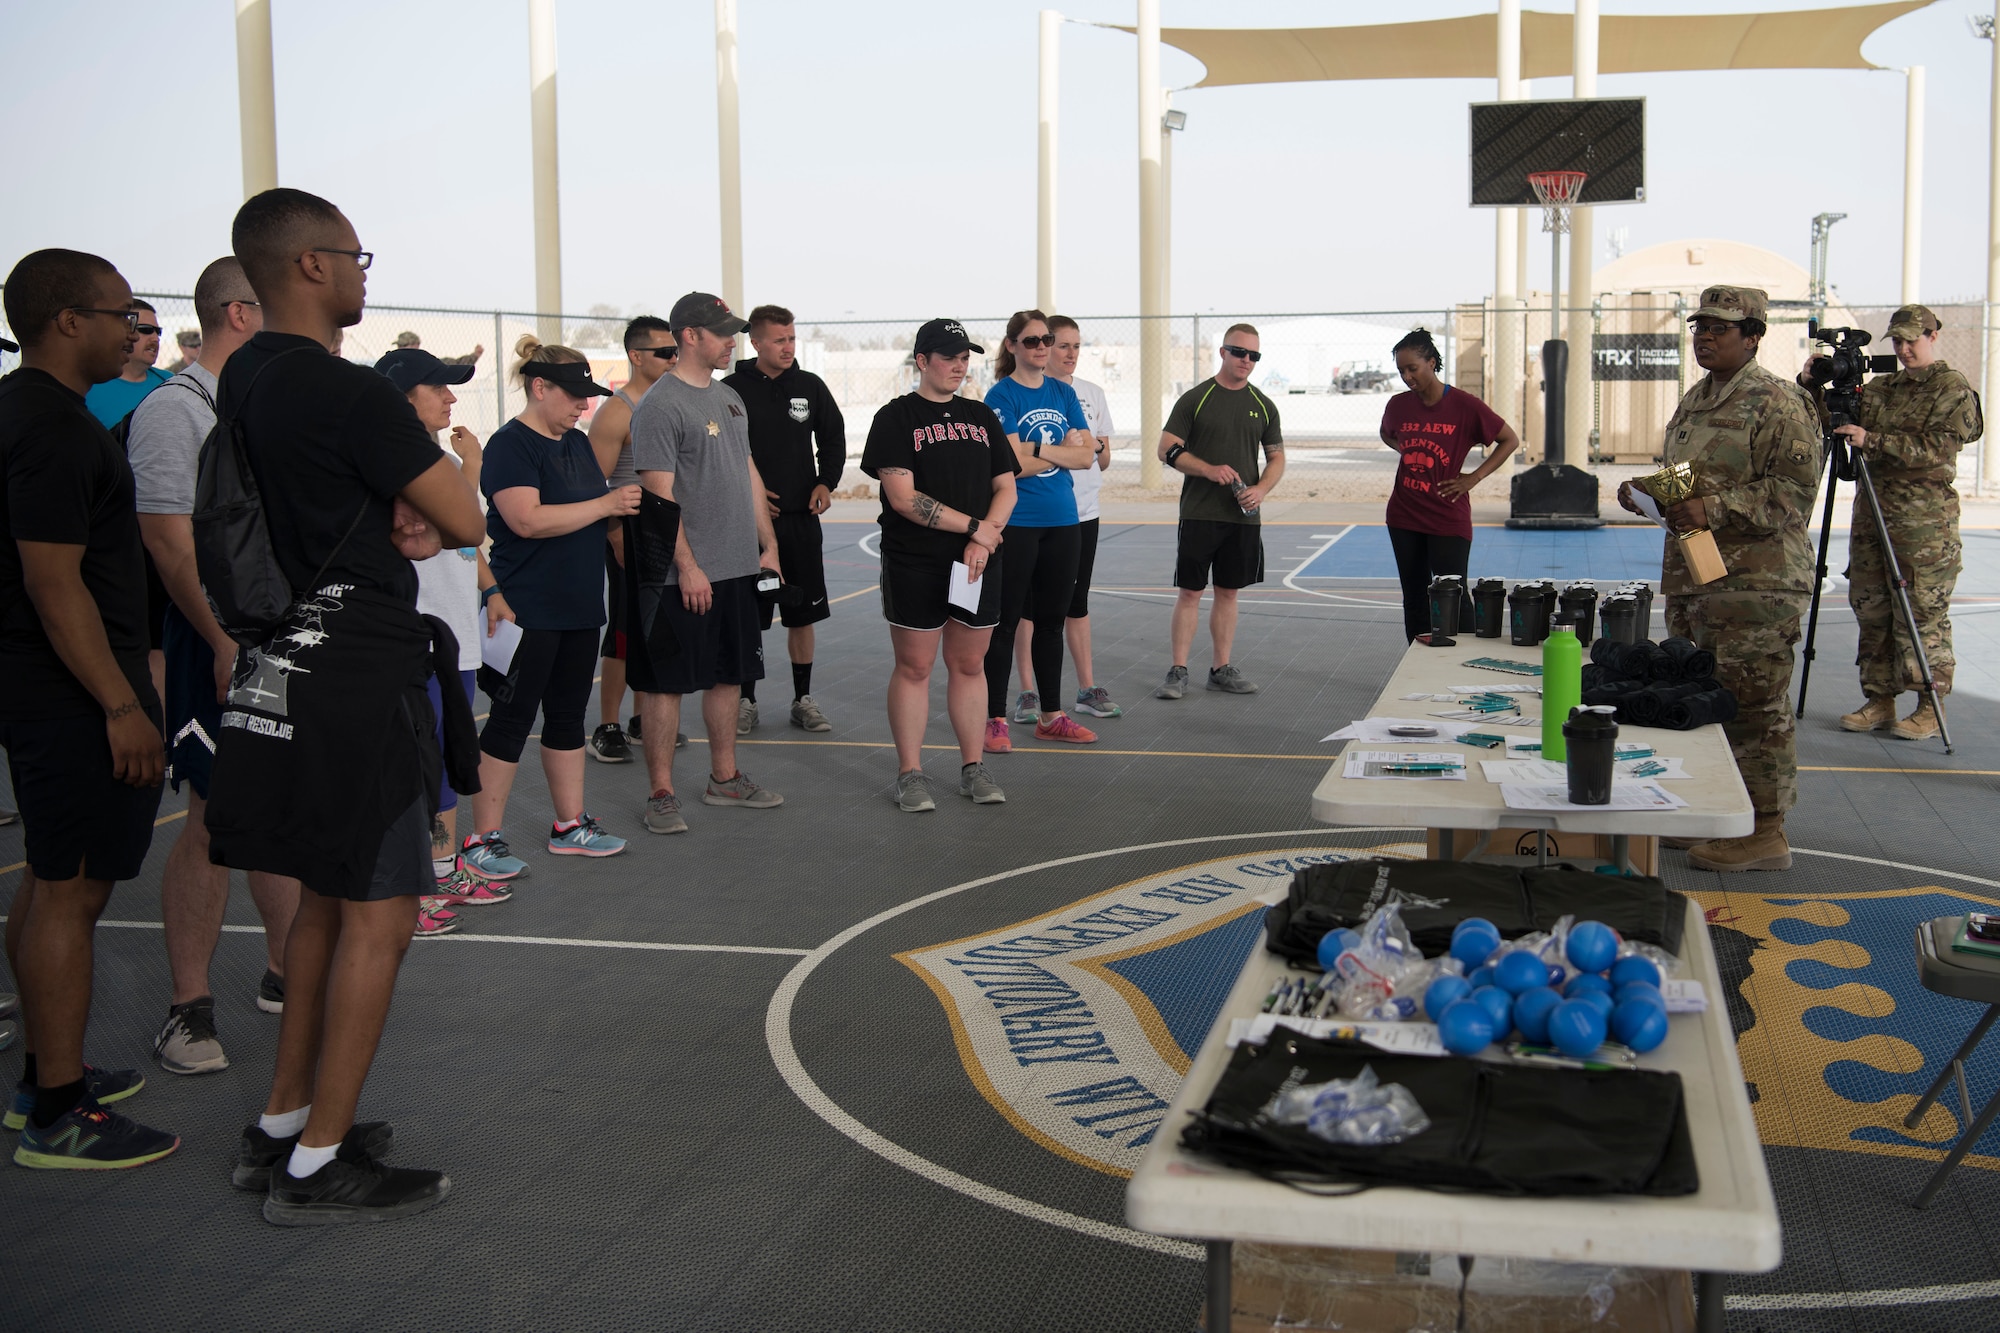 Capt. Jaleesa Council, Sexual Assault Prevention and Response Office sexual assault response coordinator, thanks the Commander’s Challenge participants at the conclusion of the event May 4, 2018, at an undisclosed location in Southwest Asia.